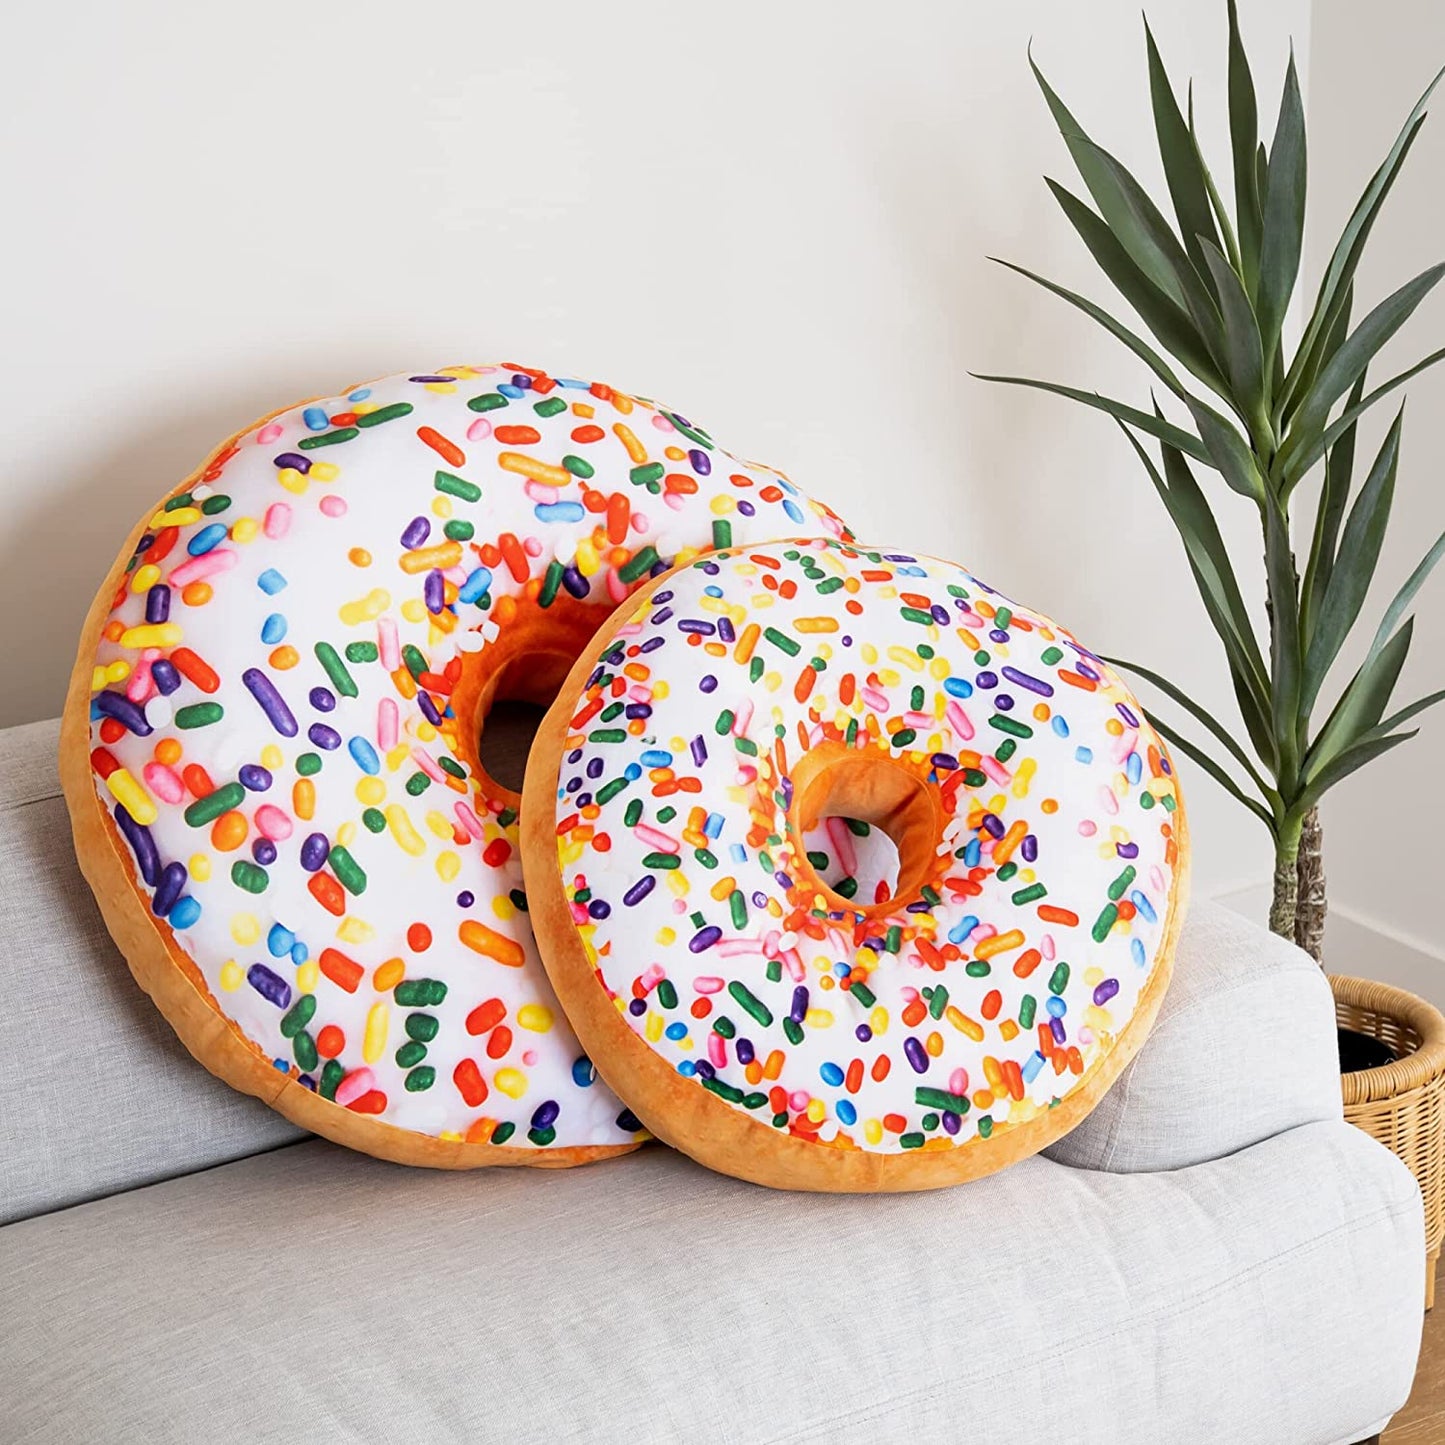 Two different sized donut shaped pillows are on a lounge.